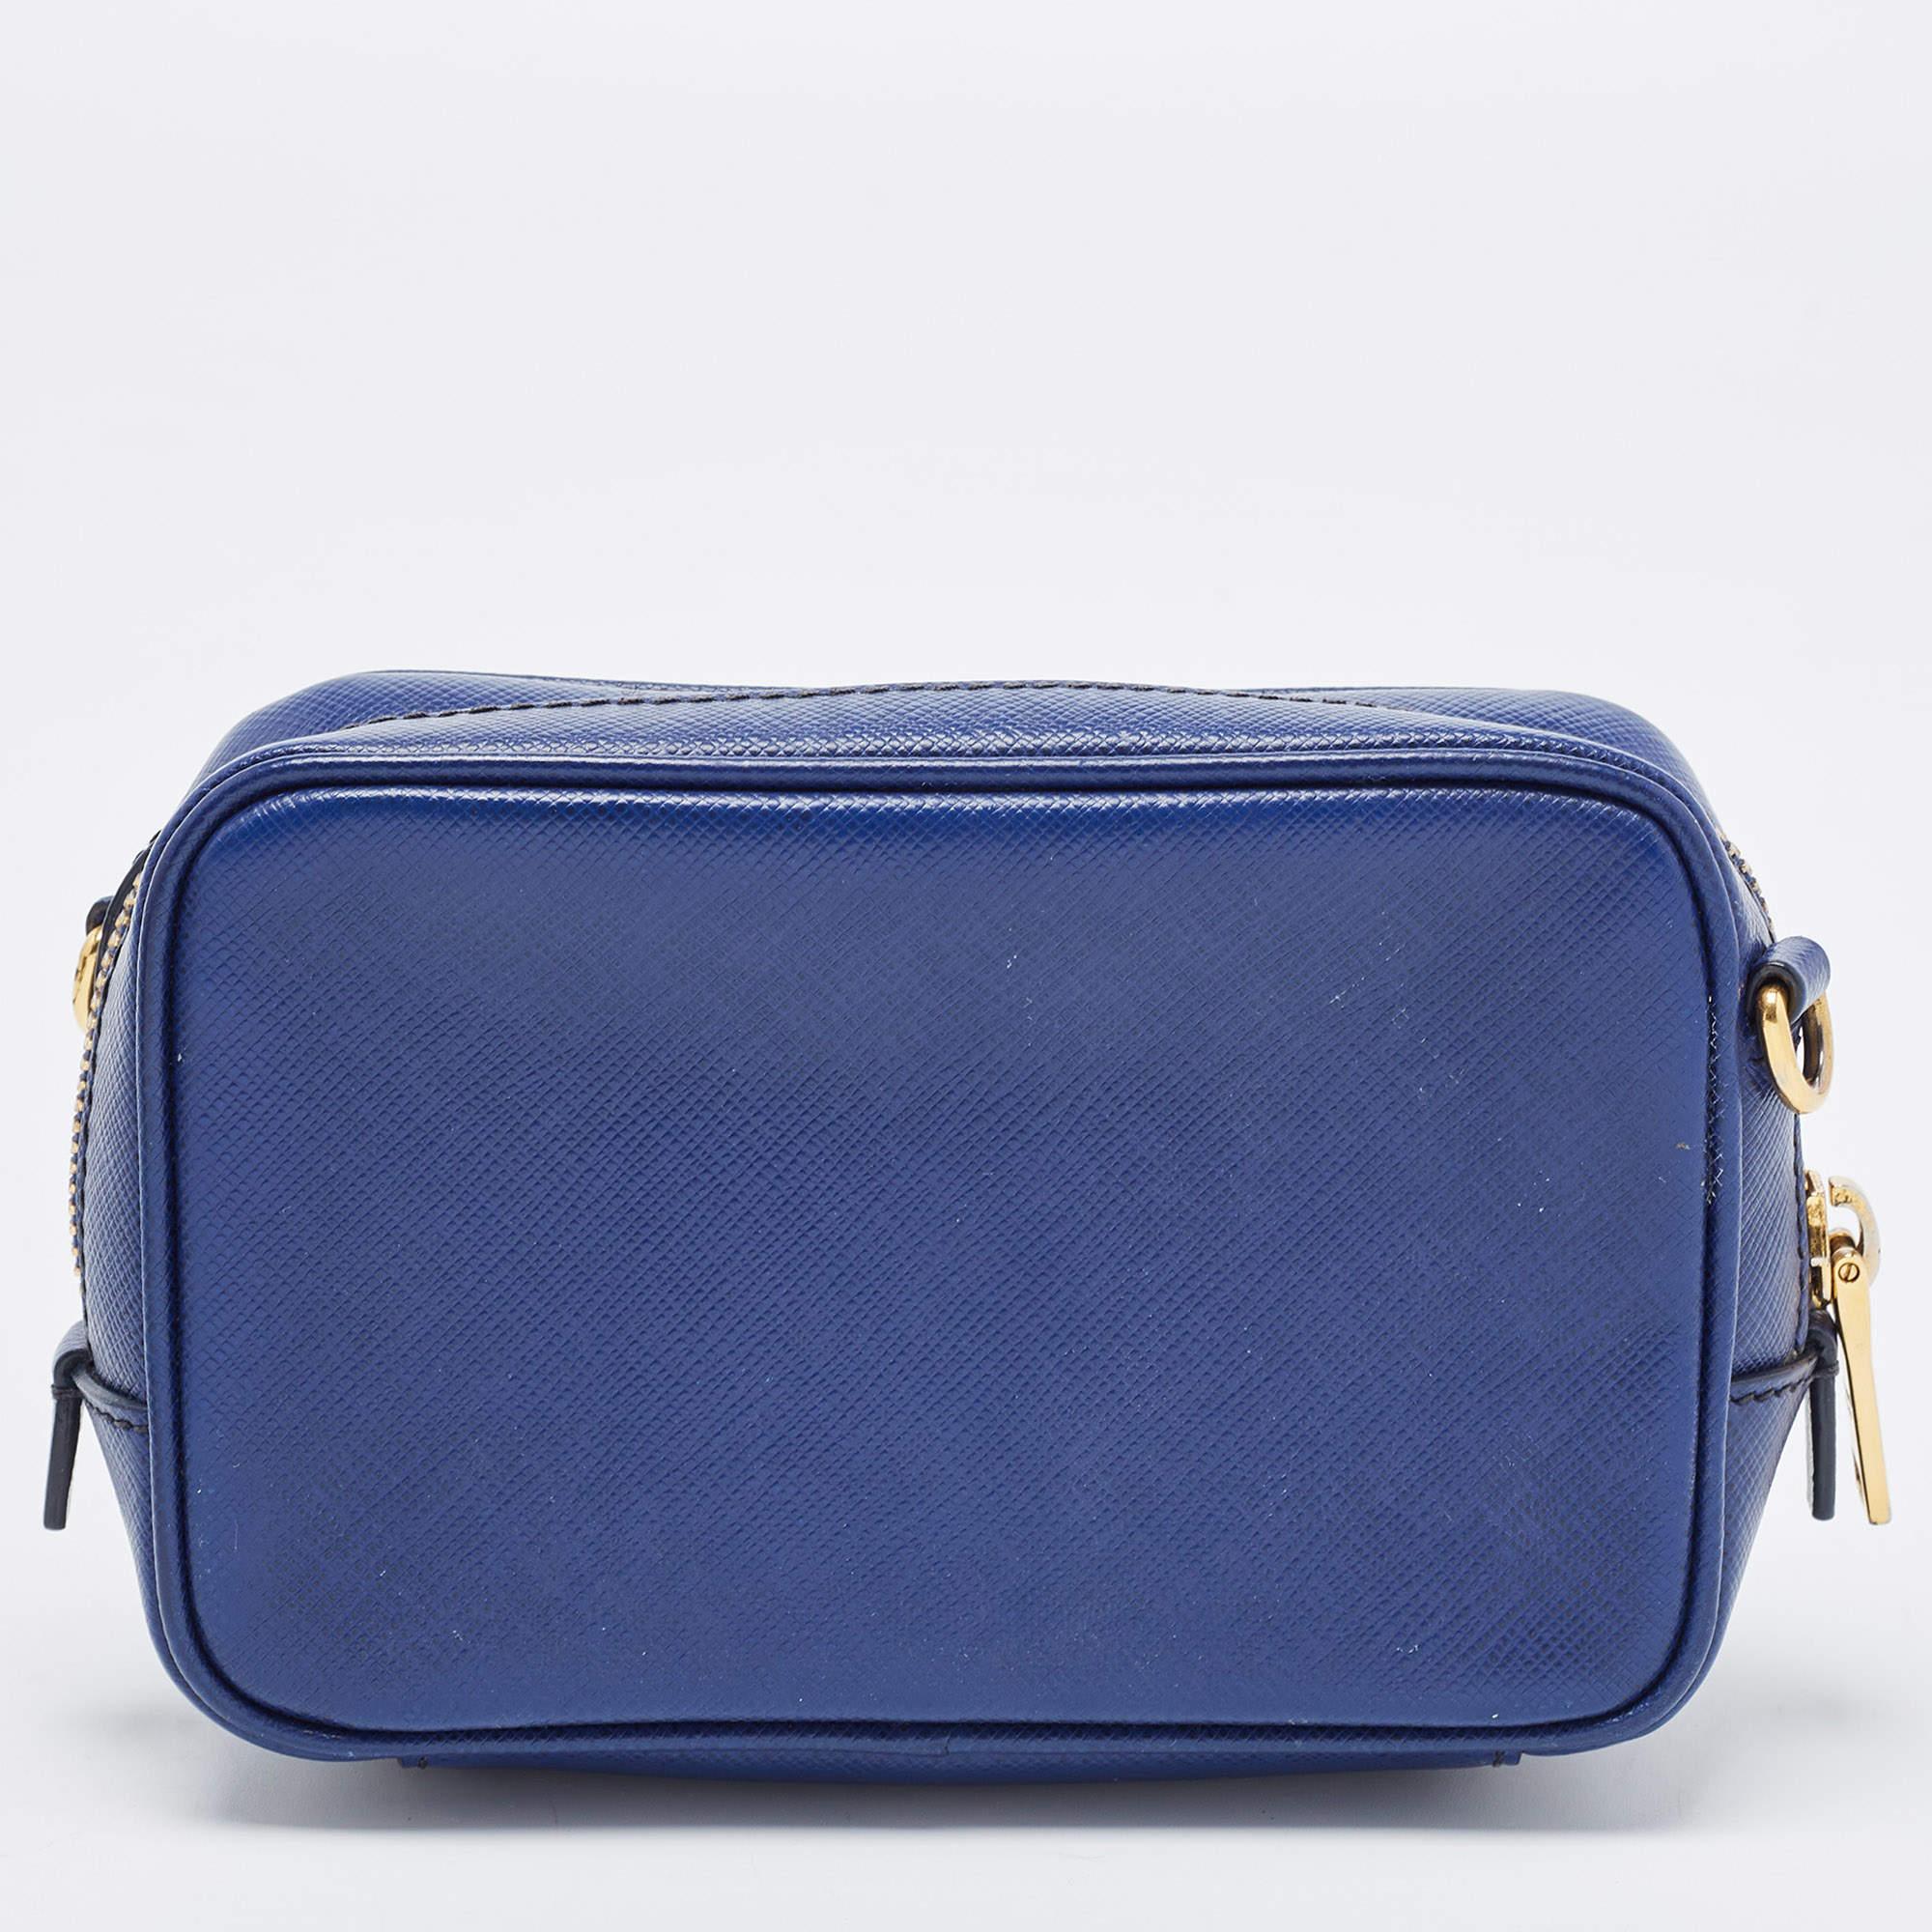 Designed to be durable, this lovely crossbody bag is a prized buy. Chic and easy to carry, the creation comes with a long shoulder strap and a spacious interior to keep your essentials safe.

Includes: Original Box, Detachable Strap

